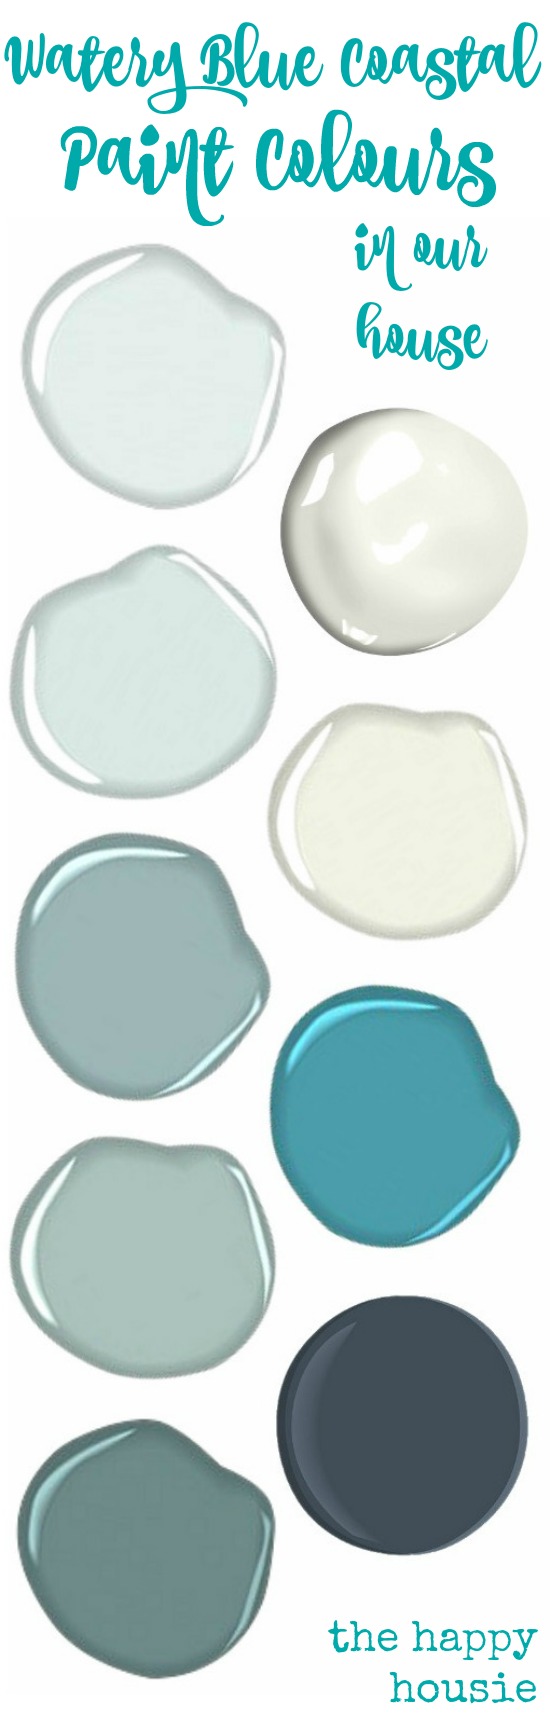 watery-blue-coastal-paint-colours-in-our-house-at-thehappyhousie